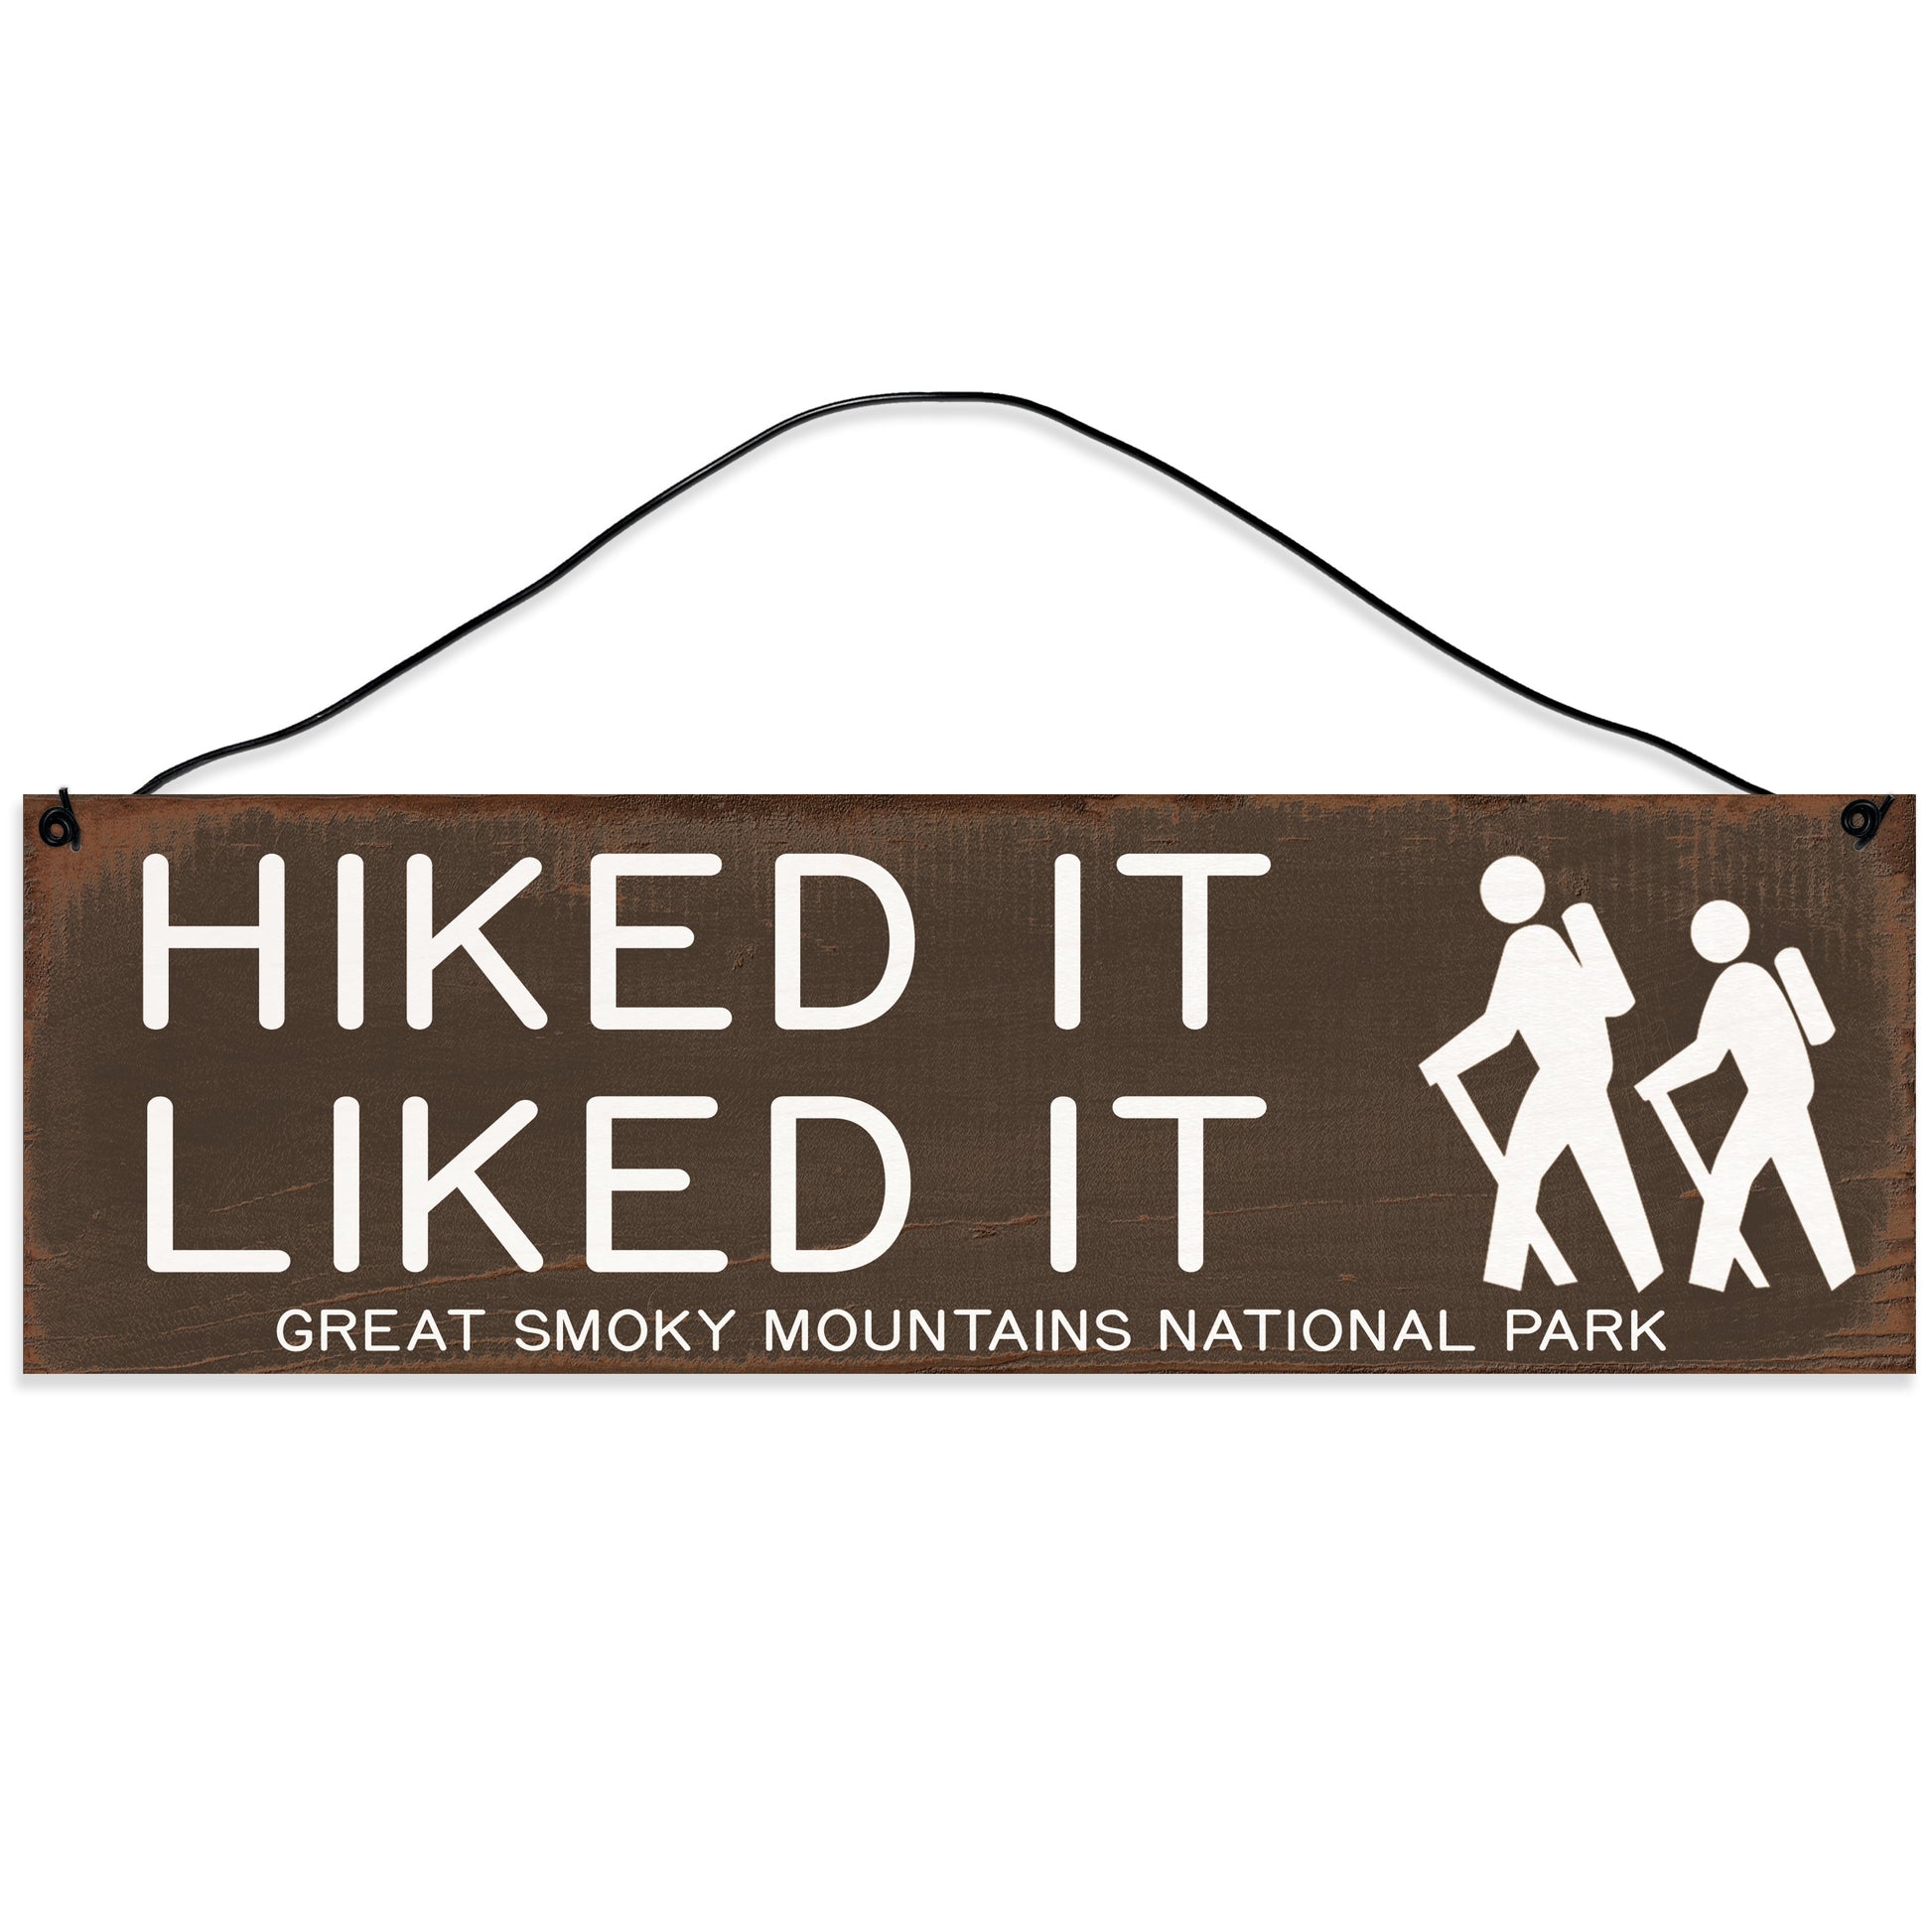 Sawyer's Mill - Hiked It. Liked It. Great Smoky Mountains National Park. Wood Sign for Home or Office. Measures 3x10 inches.